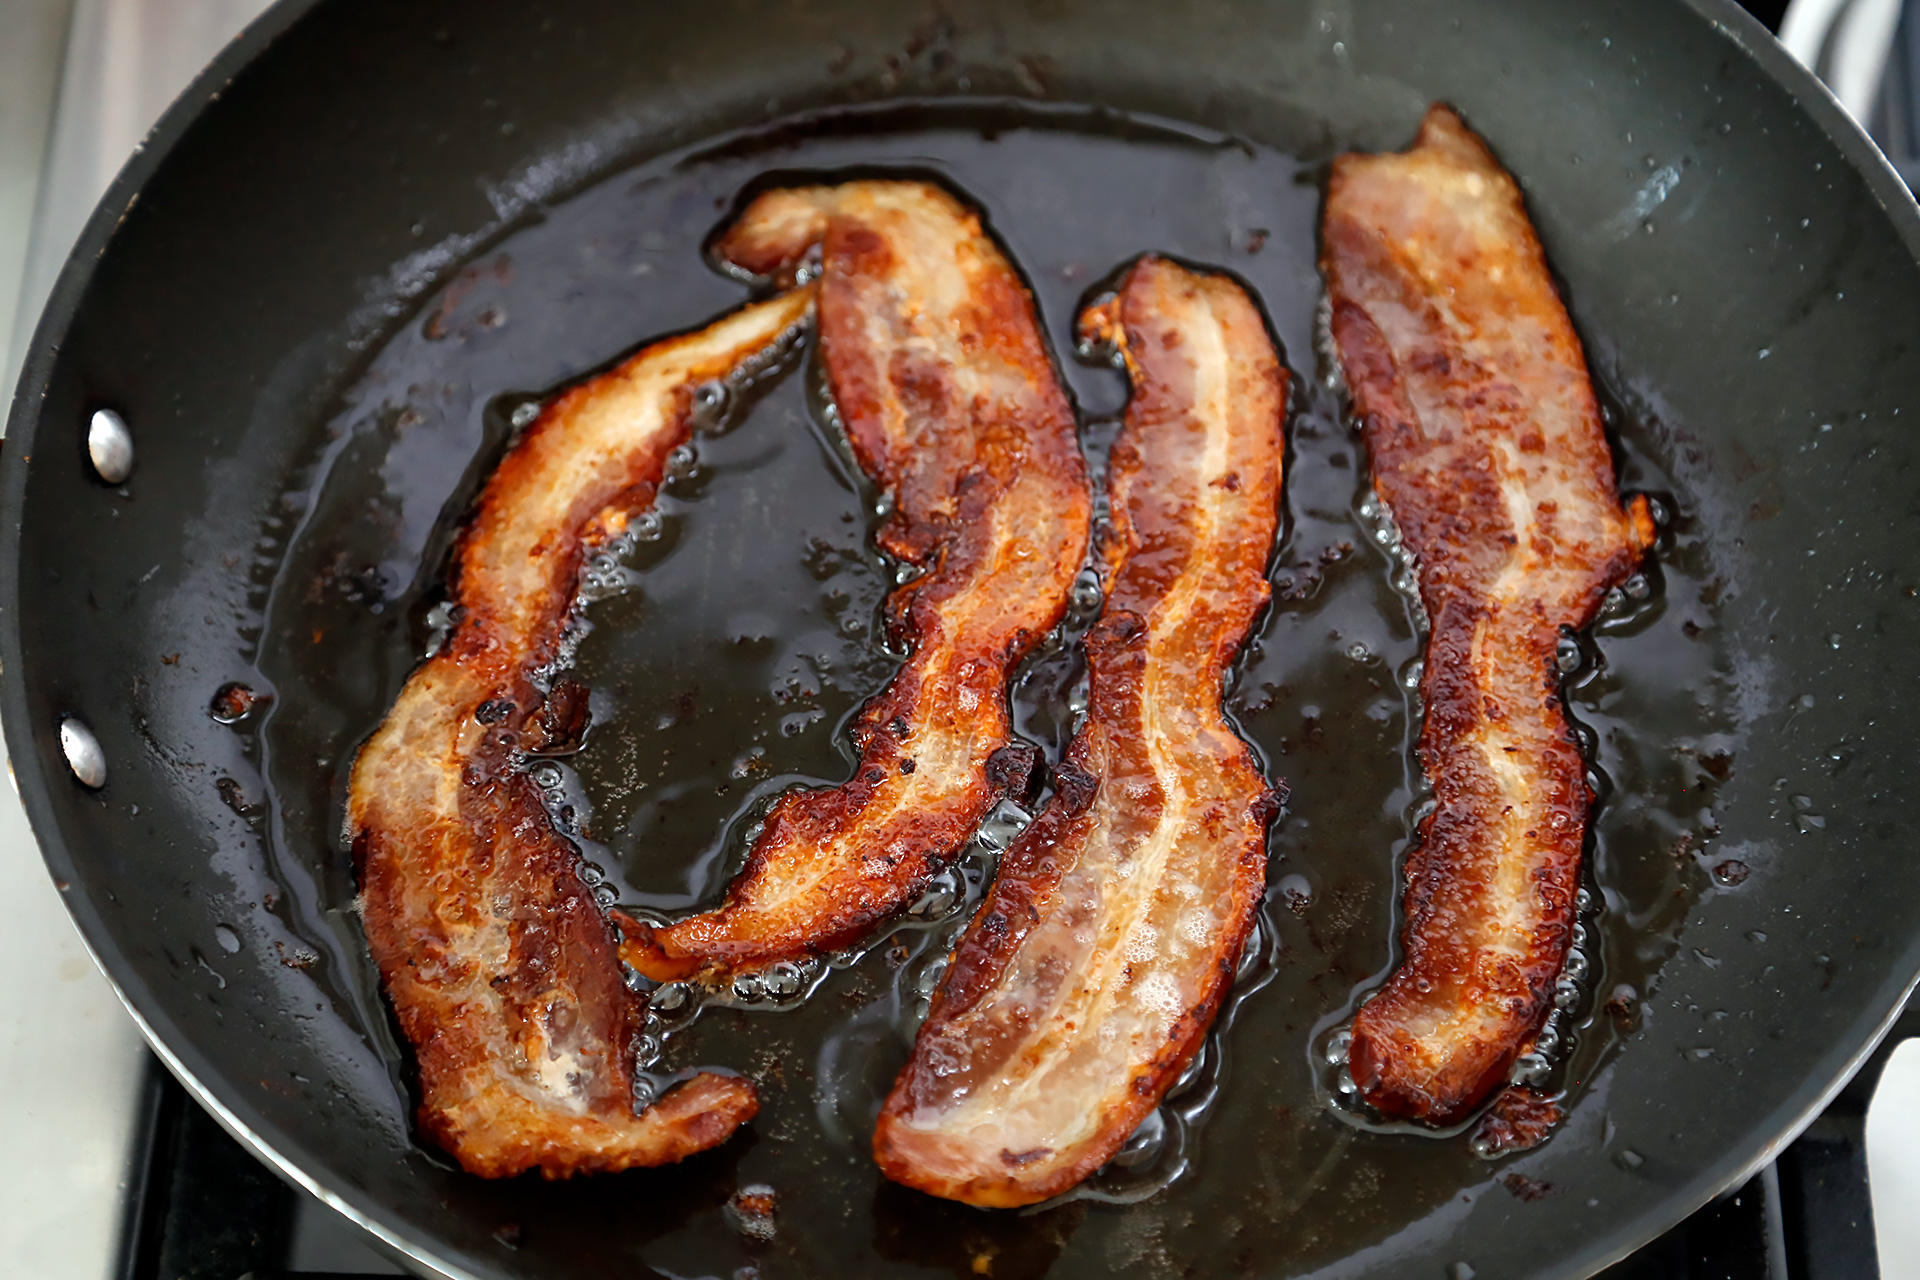 In a frying pan over medium heat, fry the bacon until crisp. Drain on paper towels.